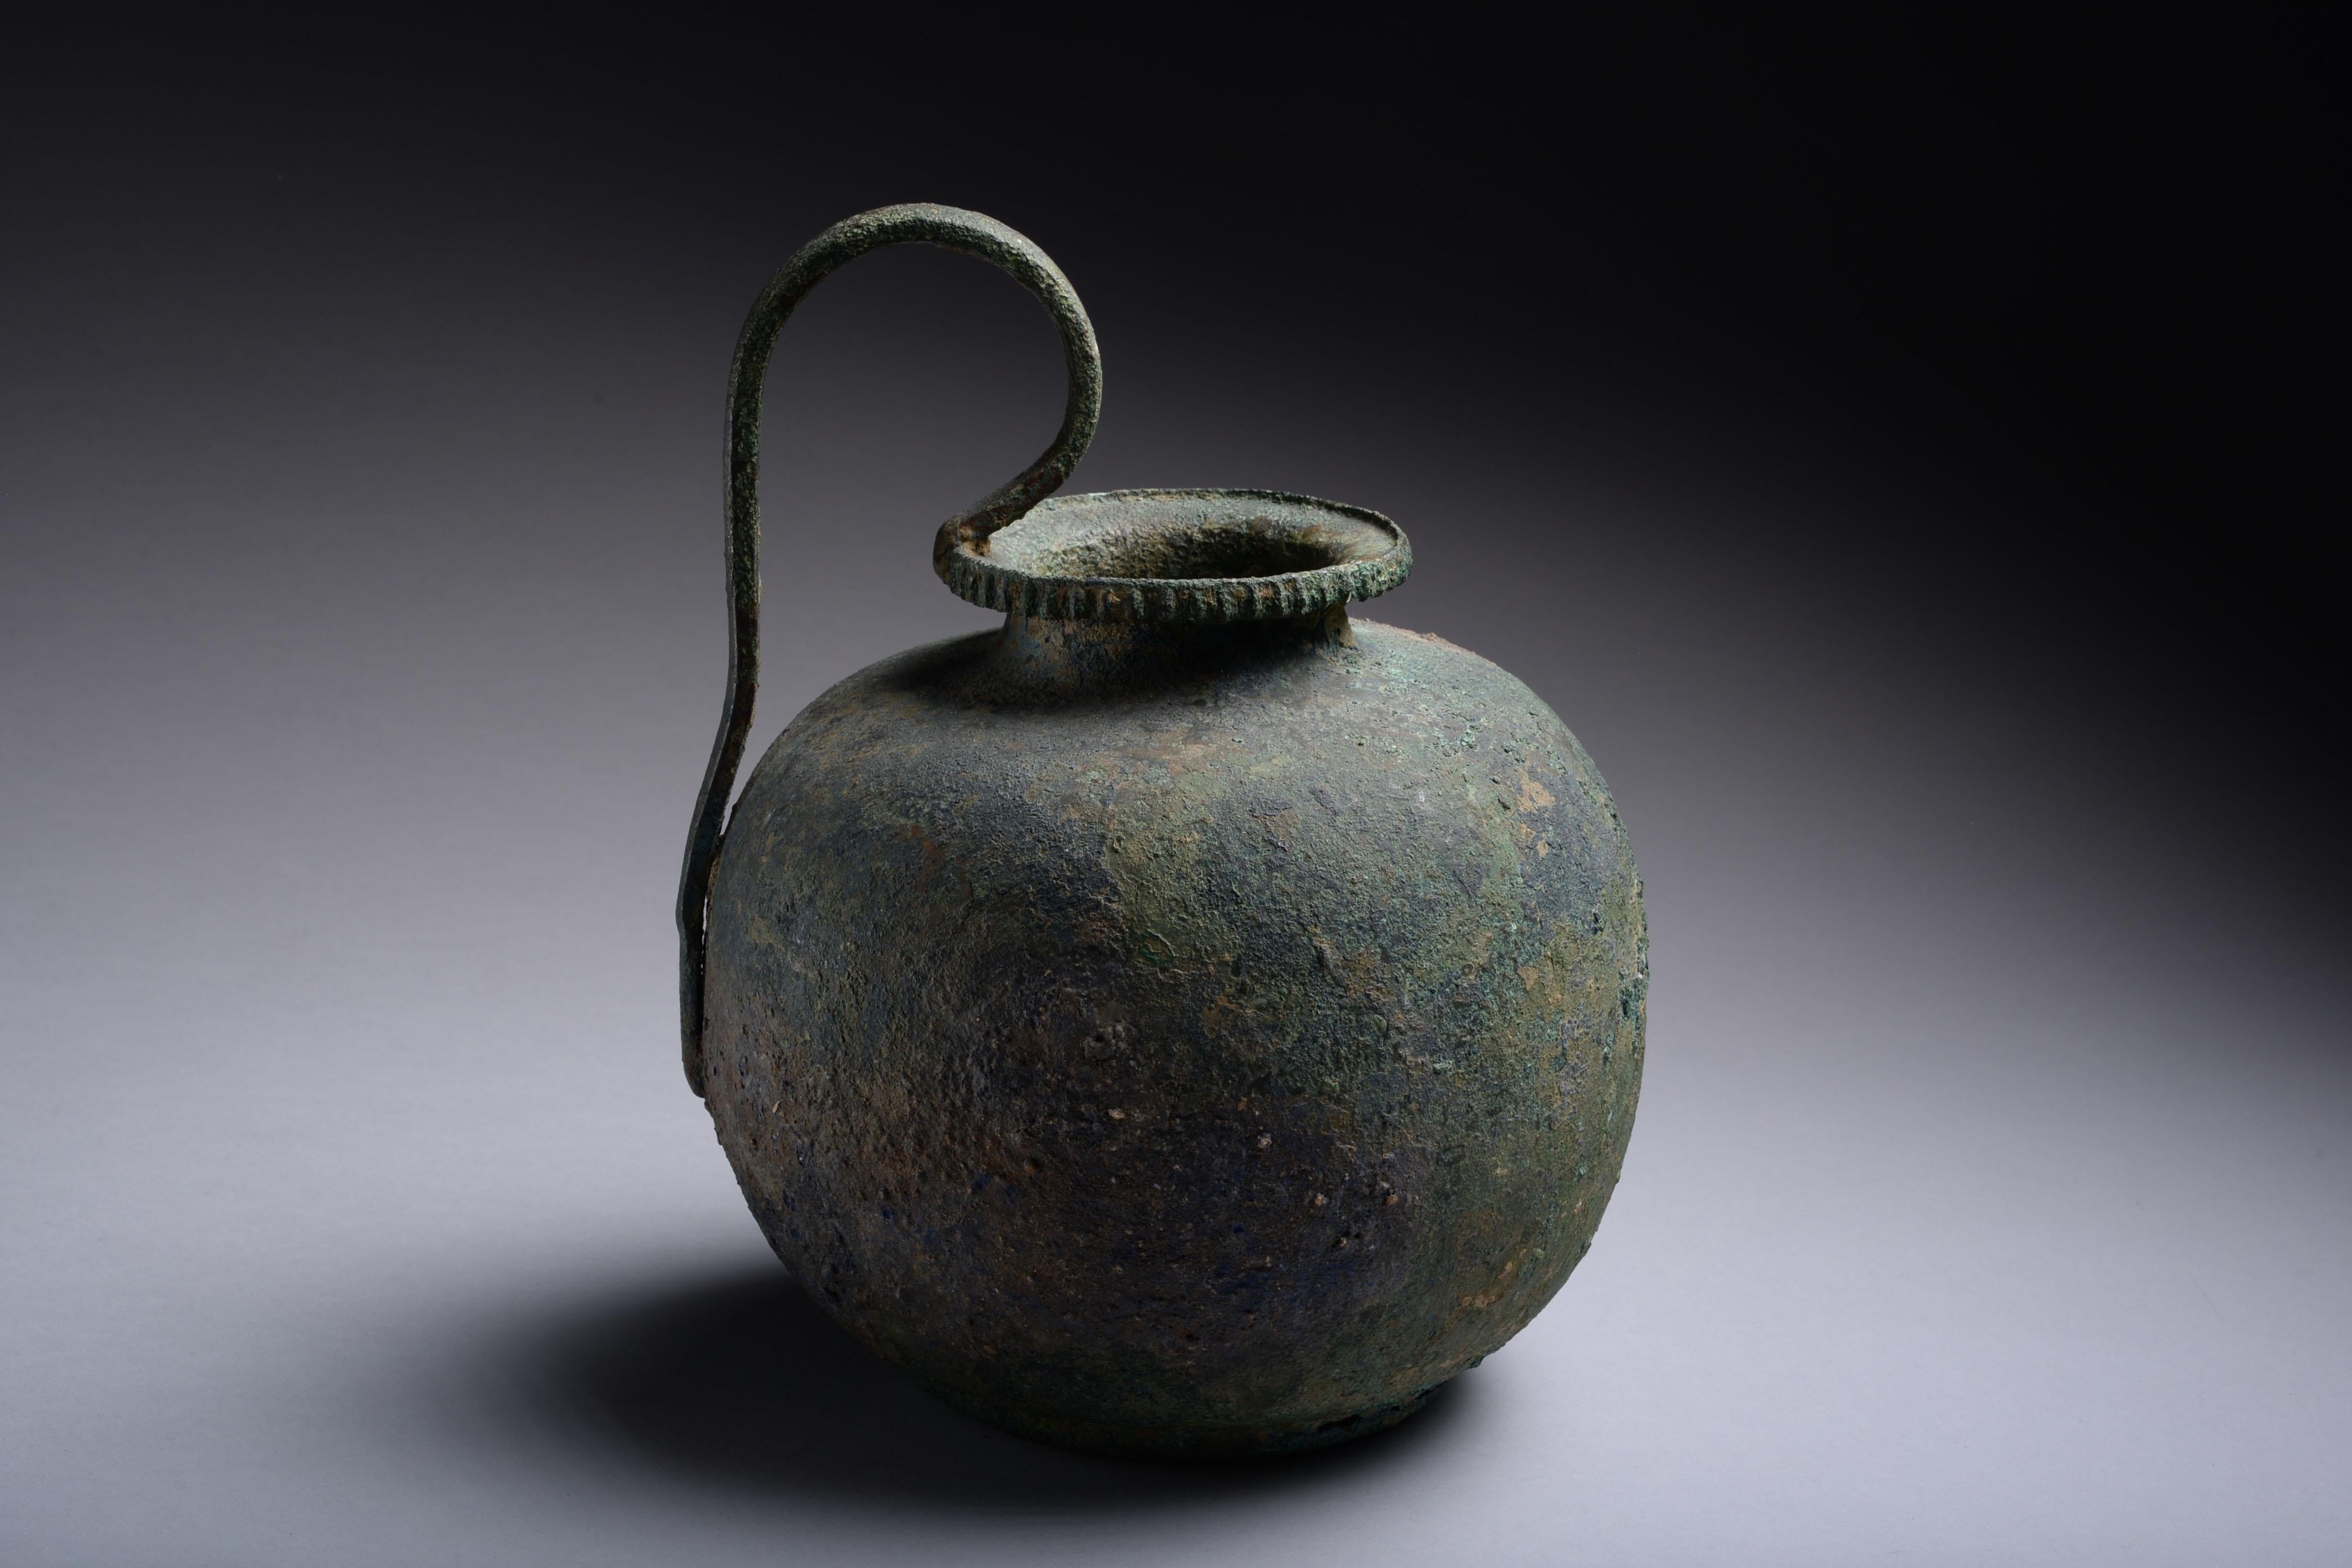 Large Greek bronze olpe vessel, used for pouring wine, dating to the 5th century BC. 

The rounded body with curved shoulders, narrow neck and everted rim with ribbed border. A separately made, elegant, tall handle curves from the lip to the